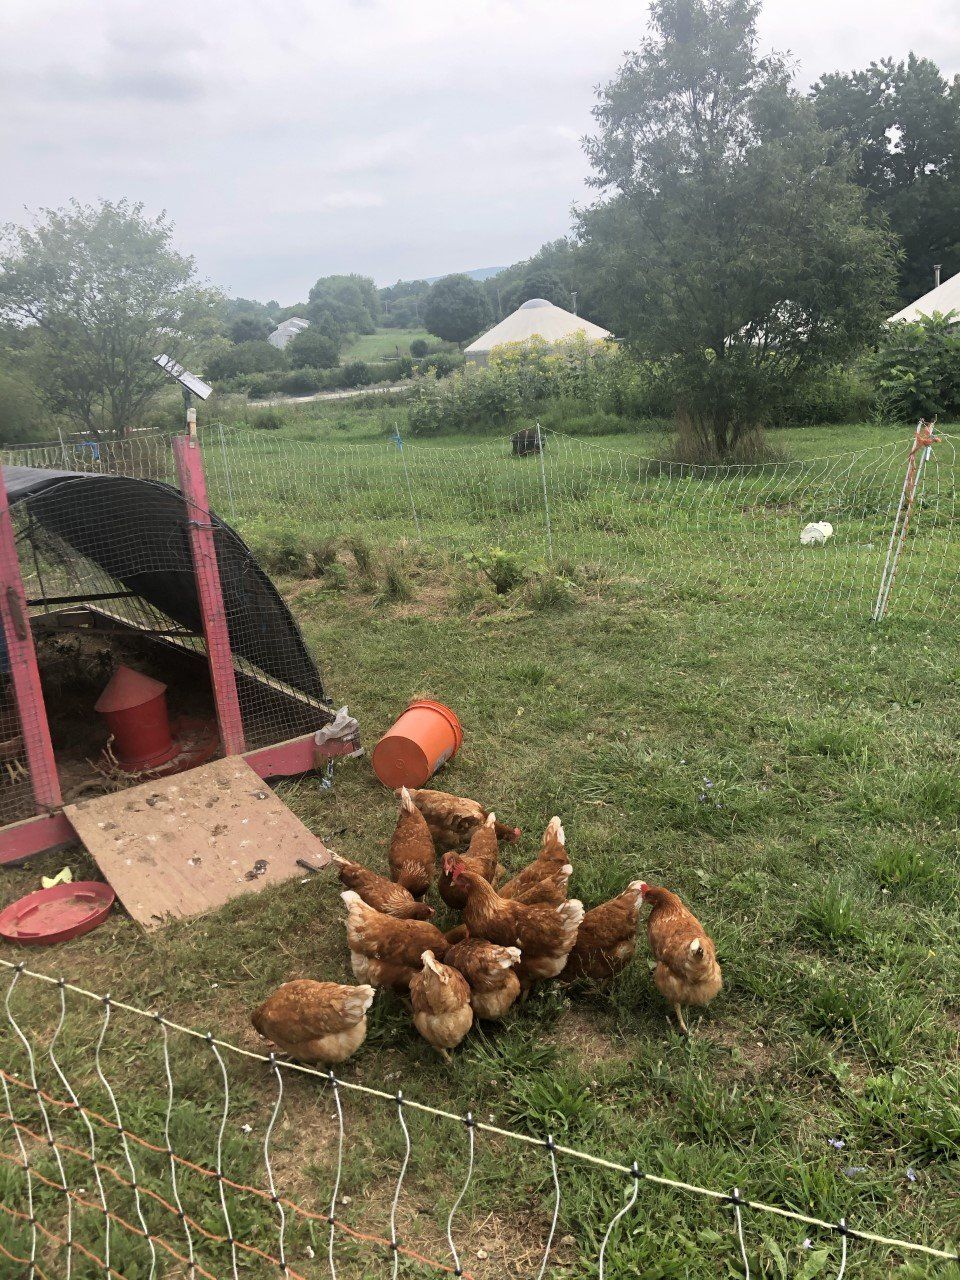 Next Happening: Farm Happenings for August 21, 2020